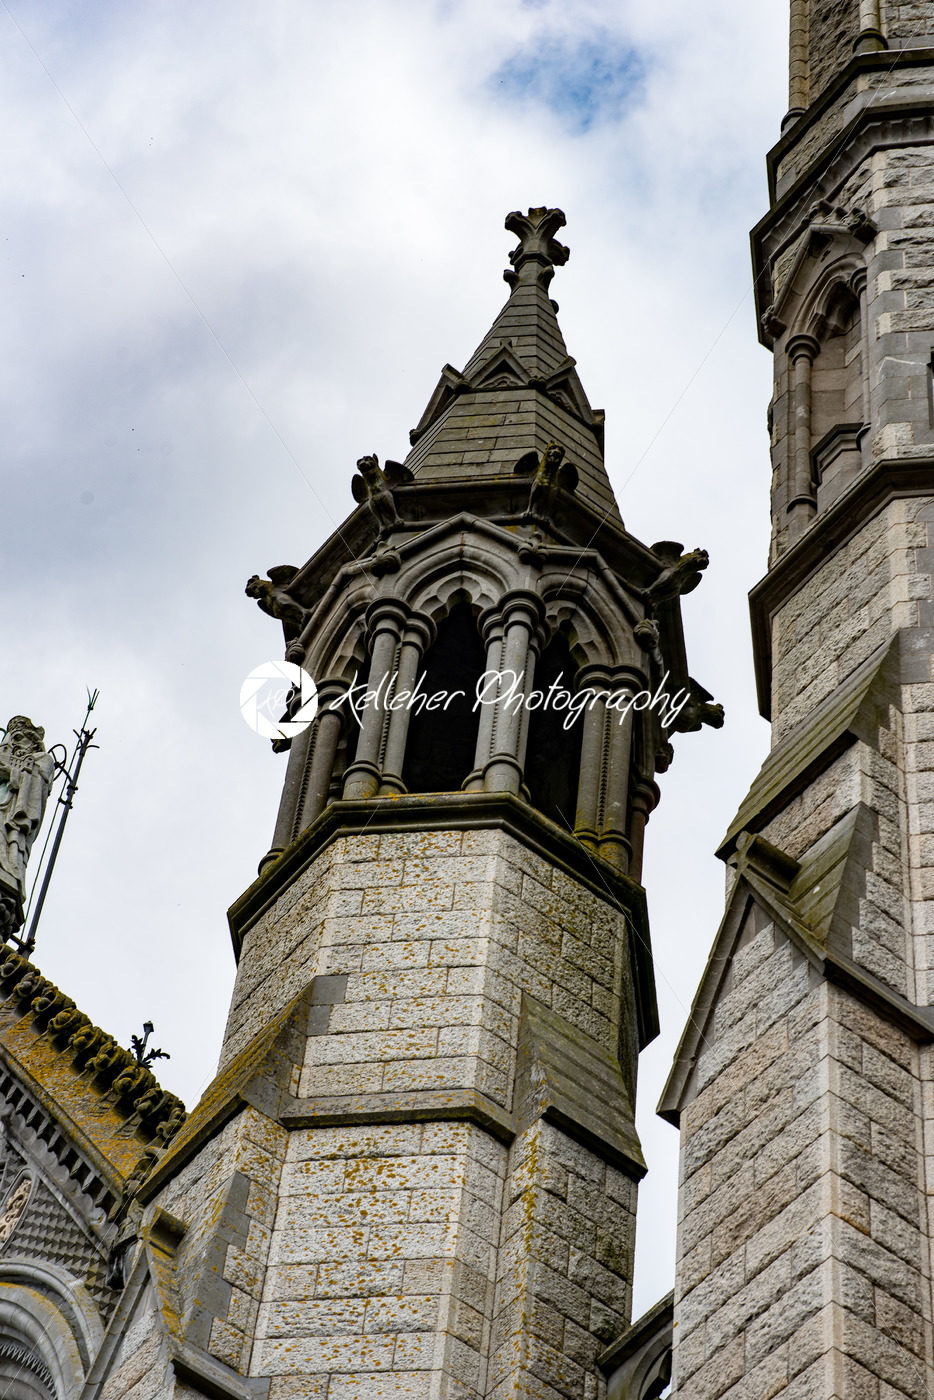 COBH, IRELAND – AUGUST 19, 2017: St. Colman’s neo-Gothic cathedral, Cobh, South Ireland - Kelleher Photography Store